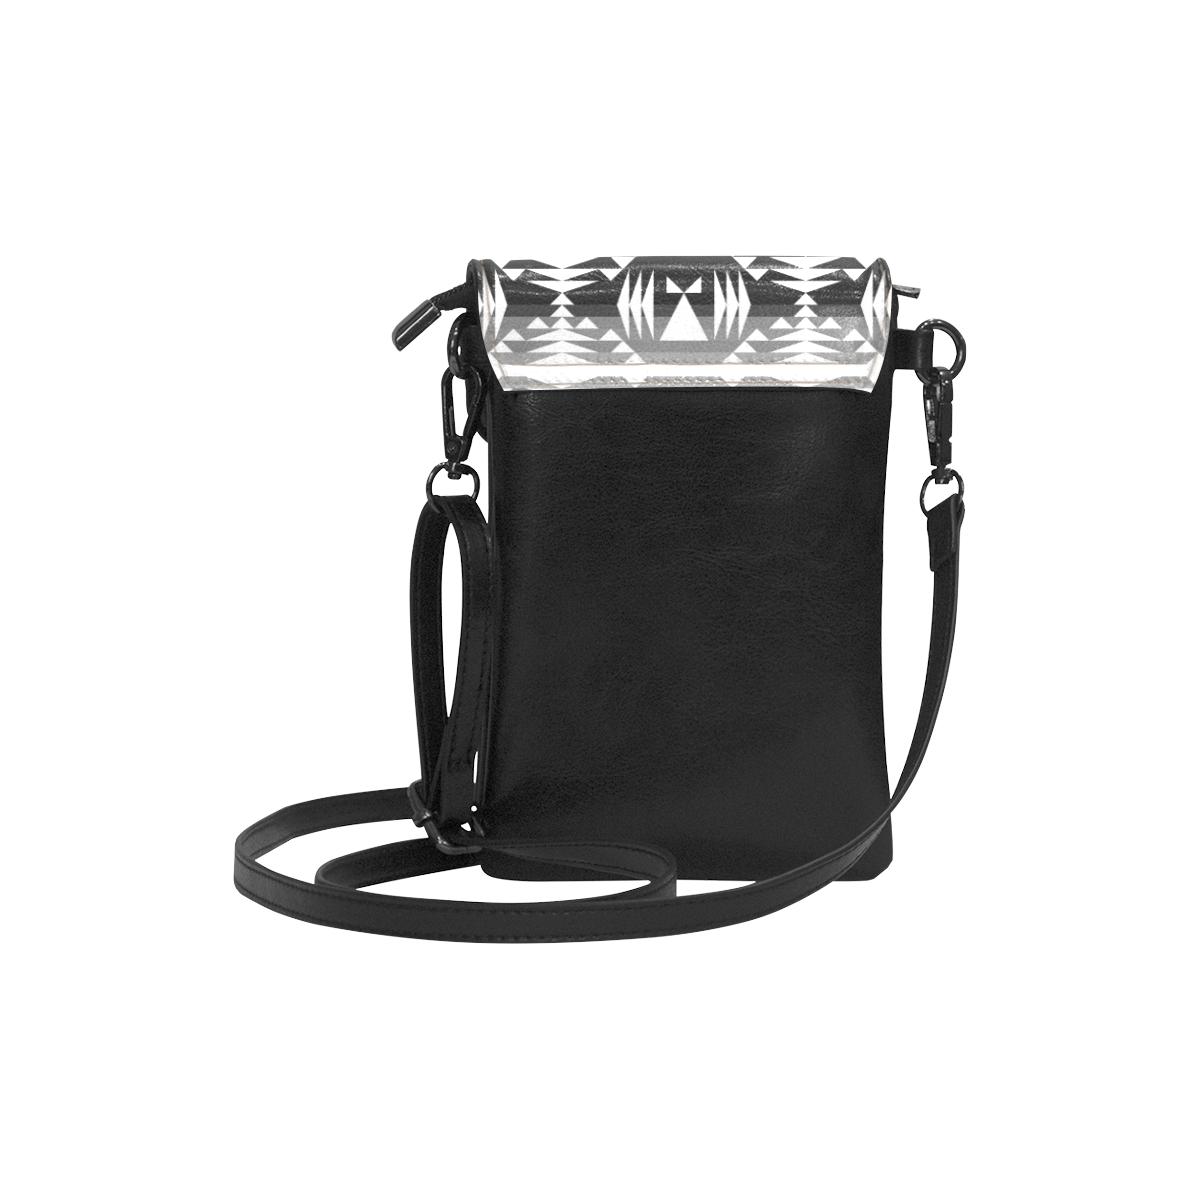 Between the Mountains Black and White Small Cell Phone Purse (Model 1711) Small Cell Phone Purse (1711) e-joyer 